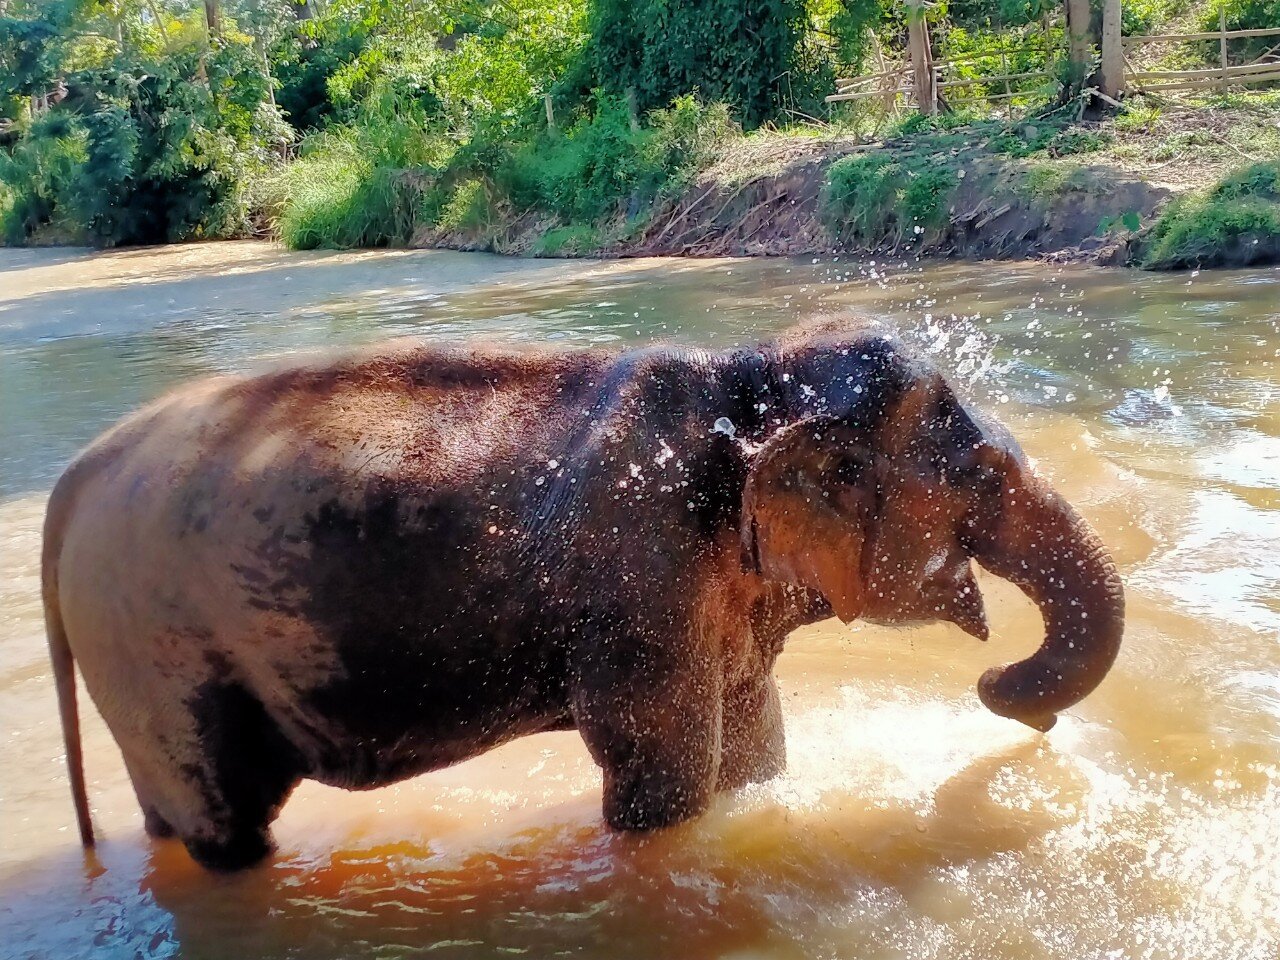 View our stunning Image Gallery showcasing an elephant in a river.